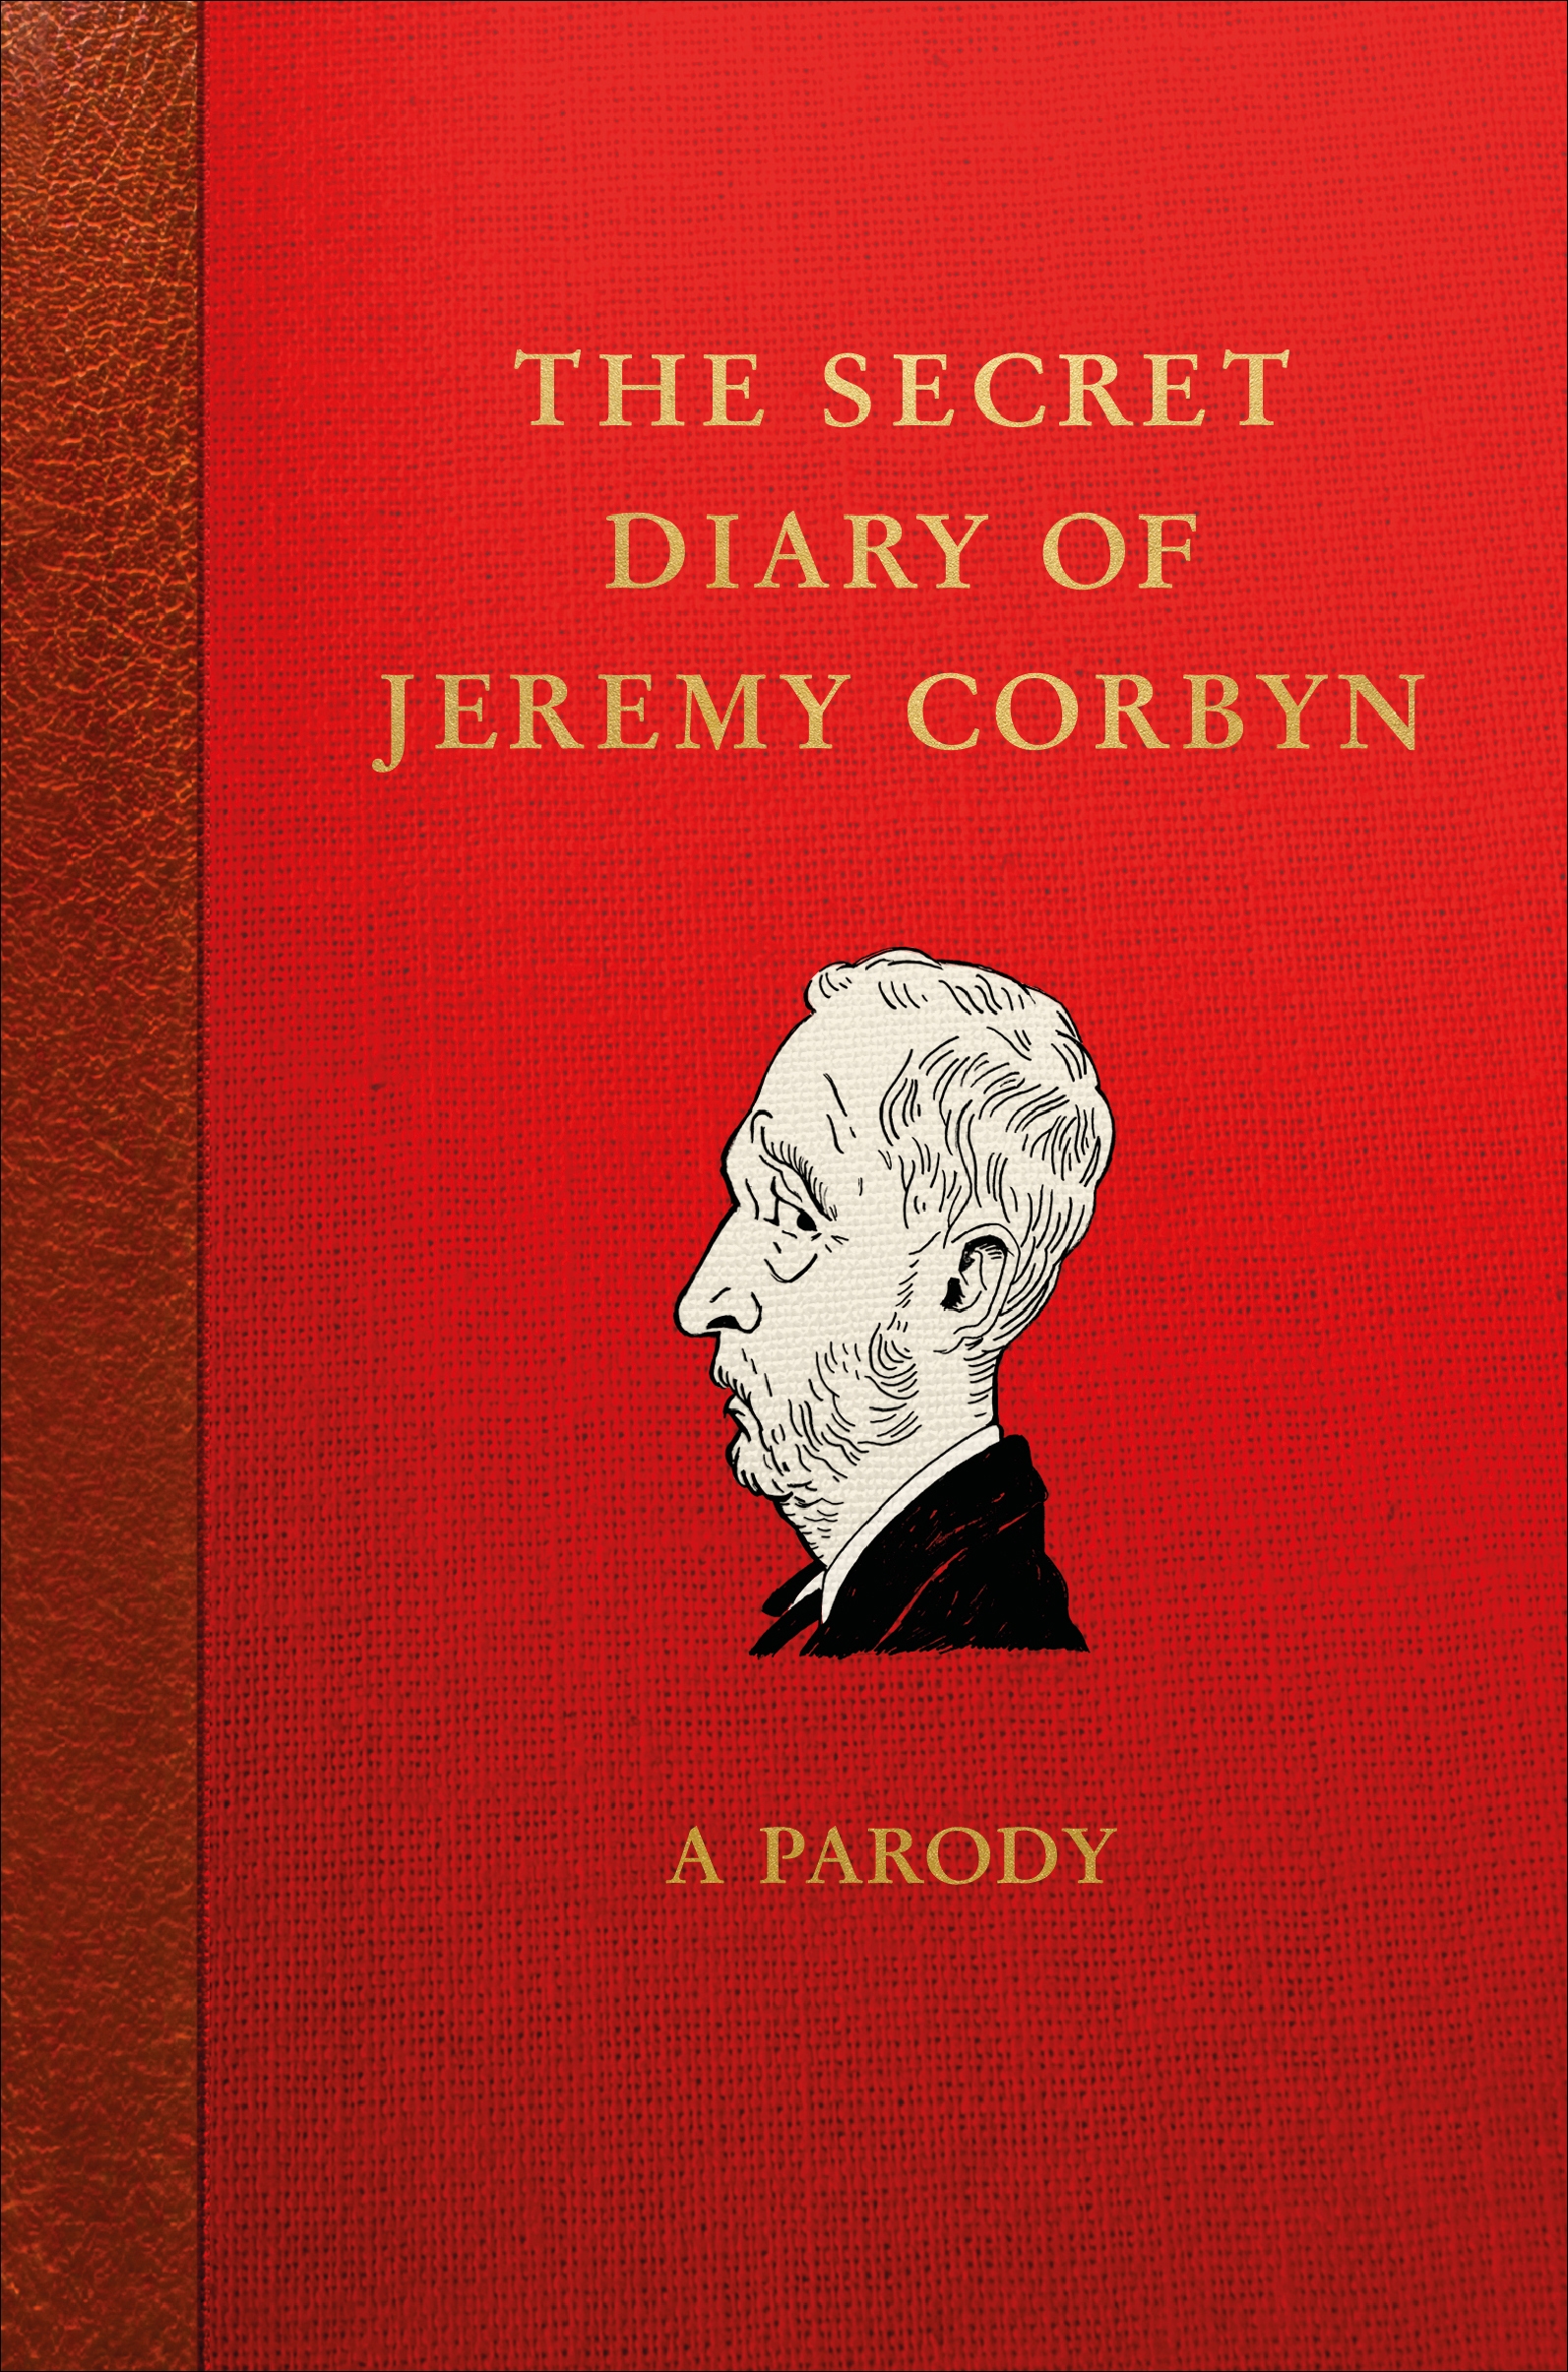 The Secret Diary of Jeremy Corbyn by Lucien Young - Penguin Books Australia